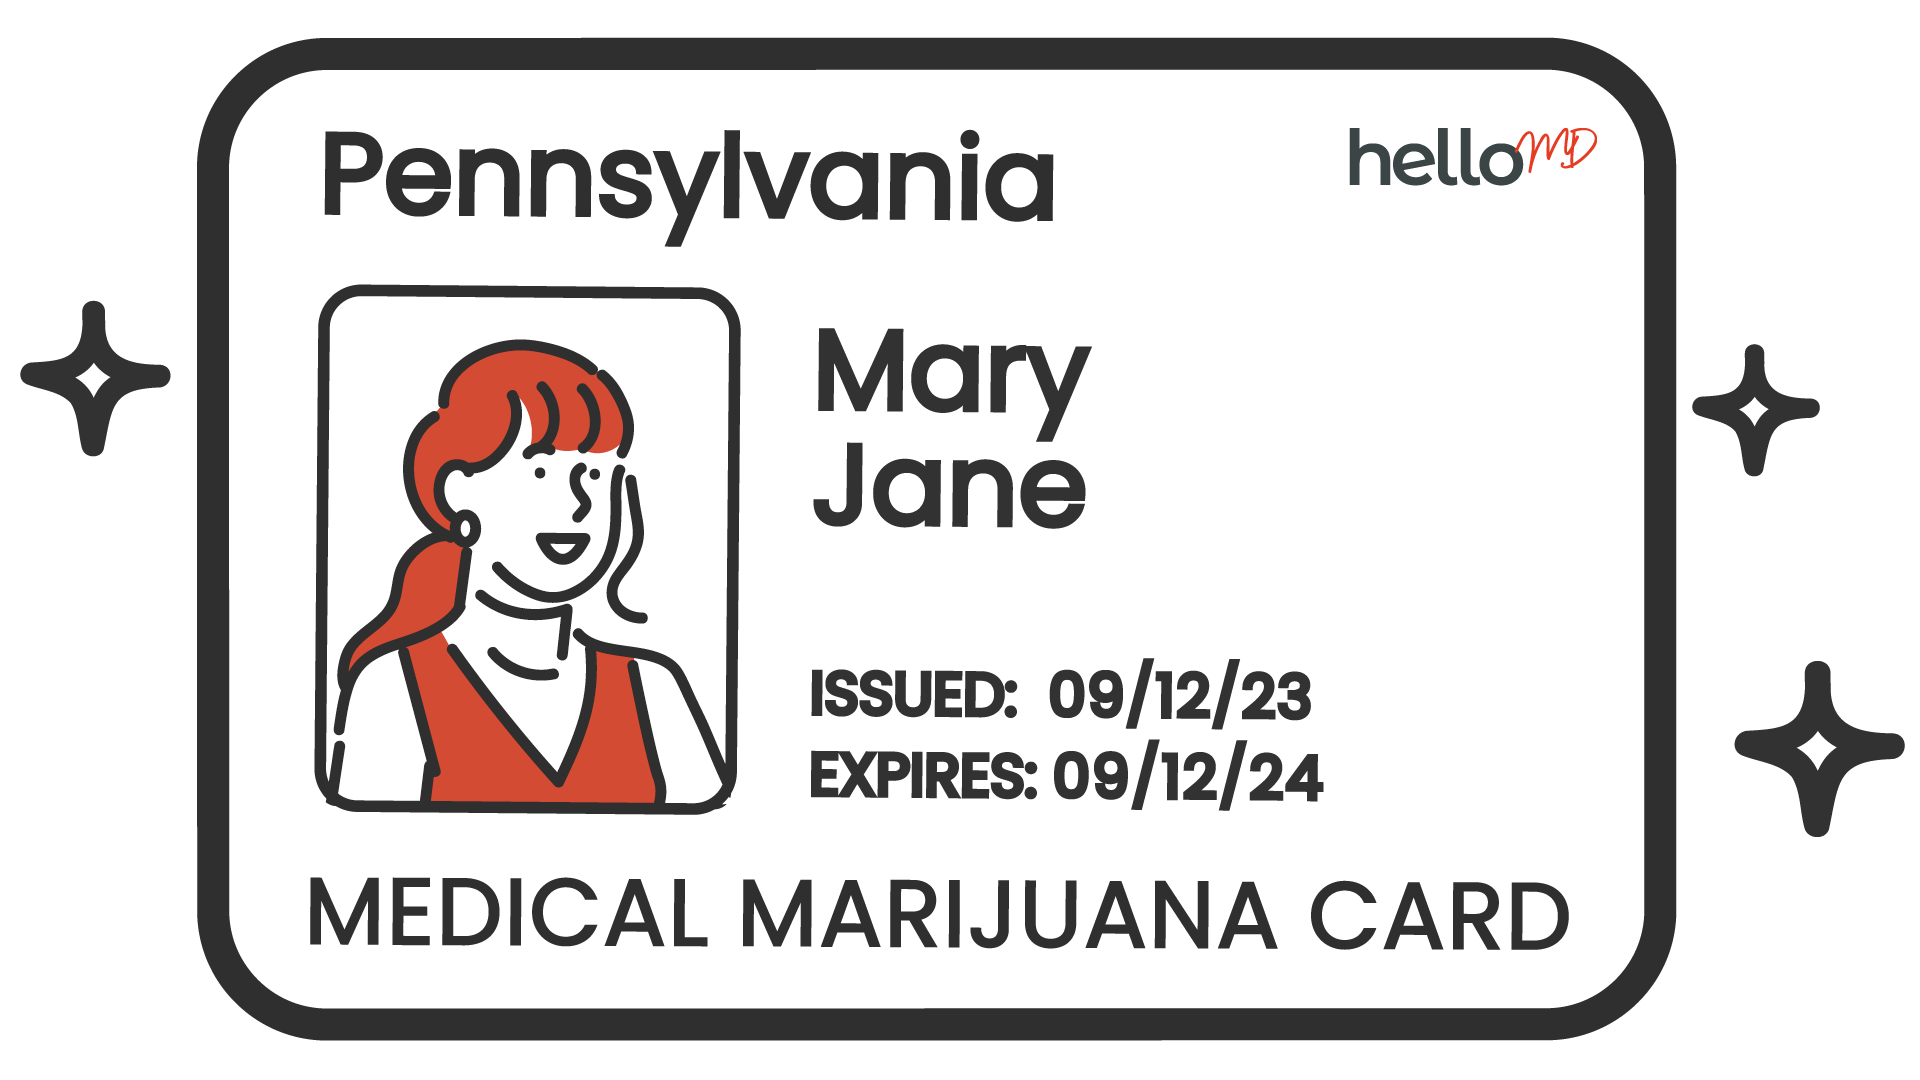 Hey, Pennsylvania! Save $25 on your medical card with HelloMD